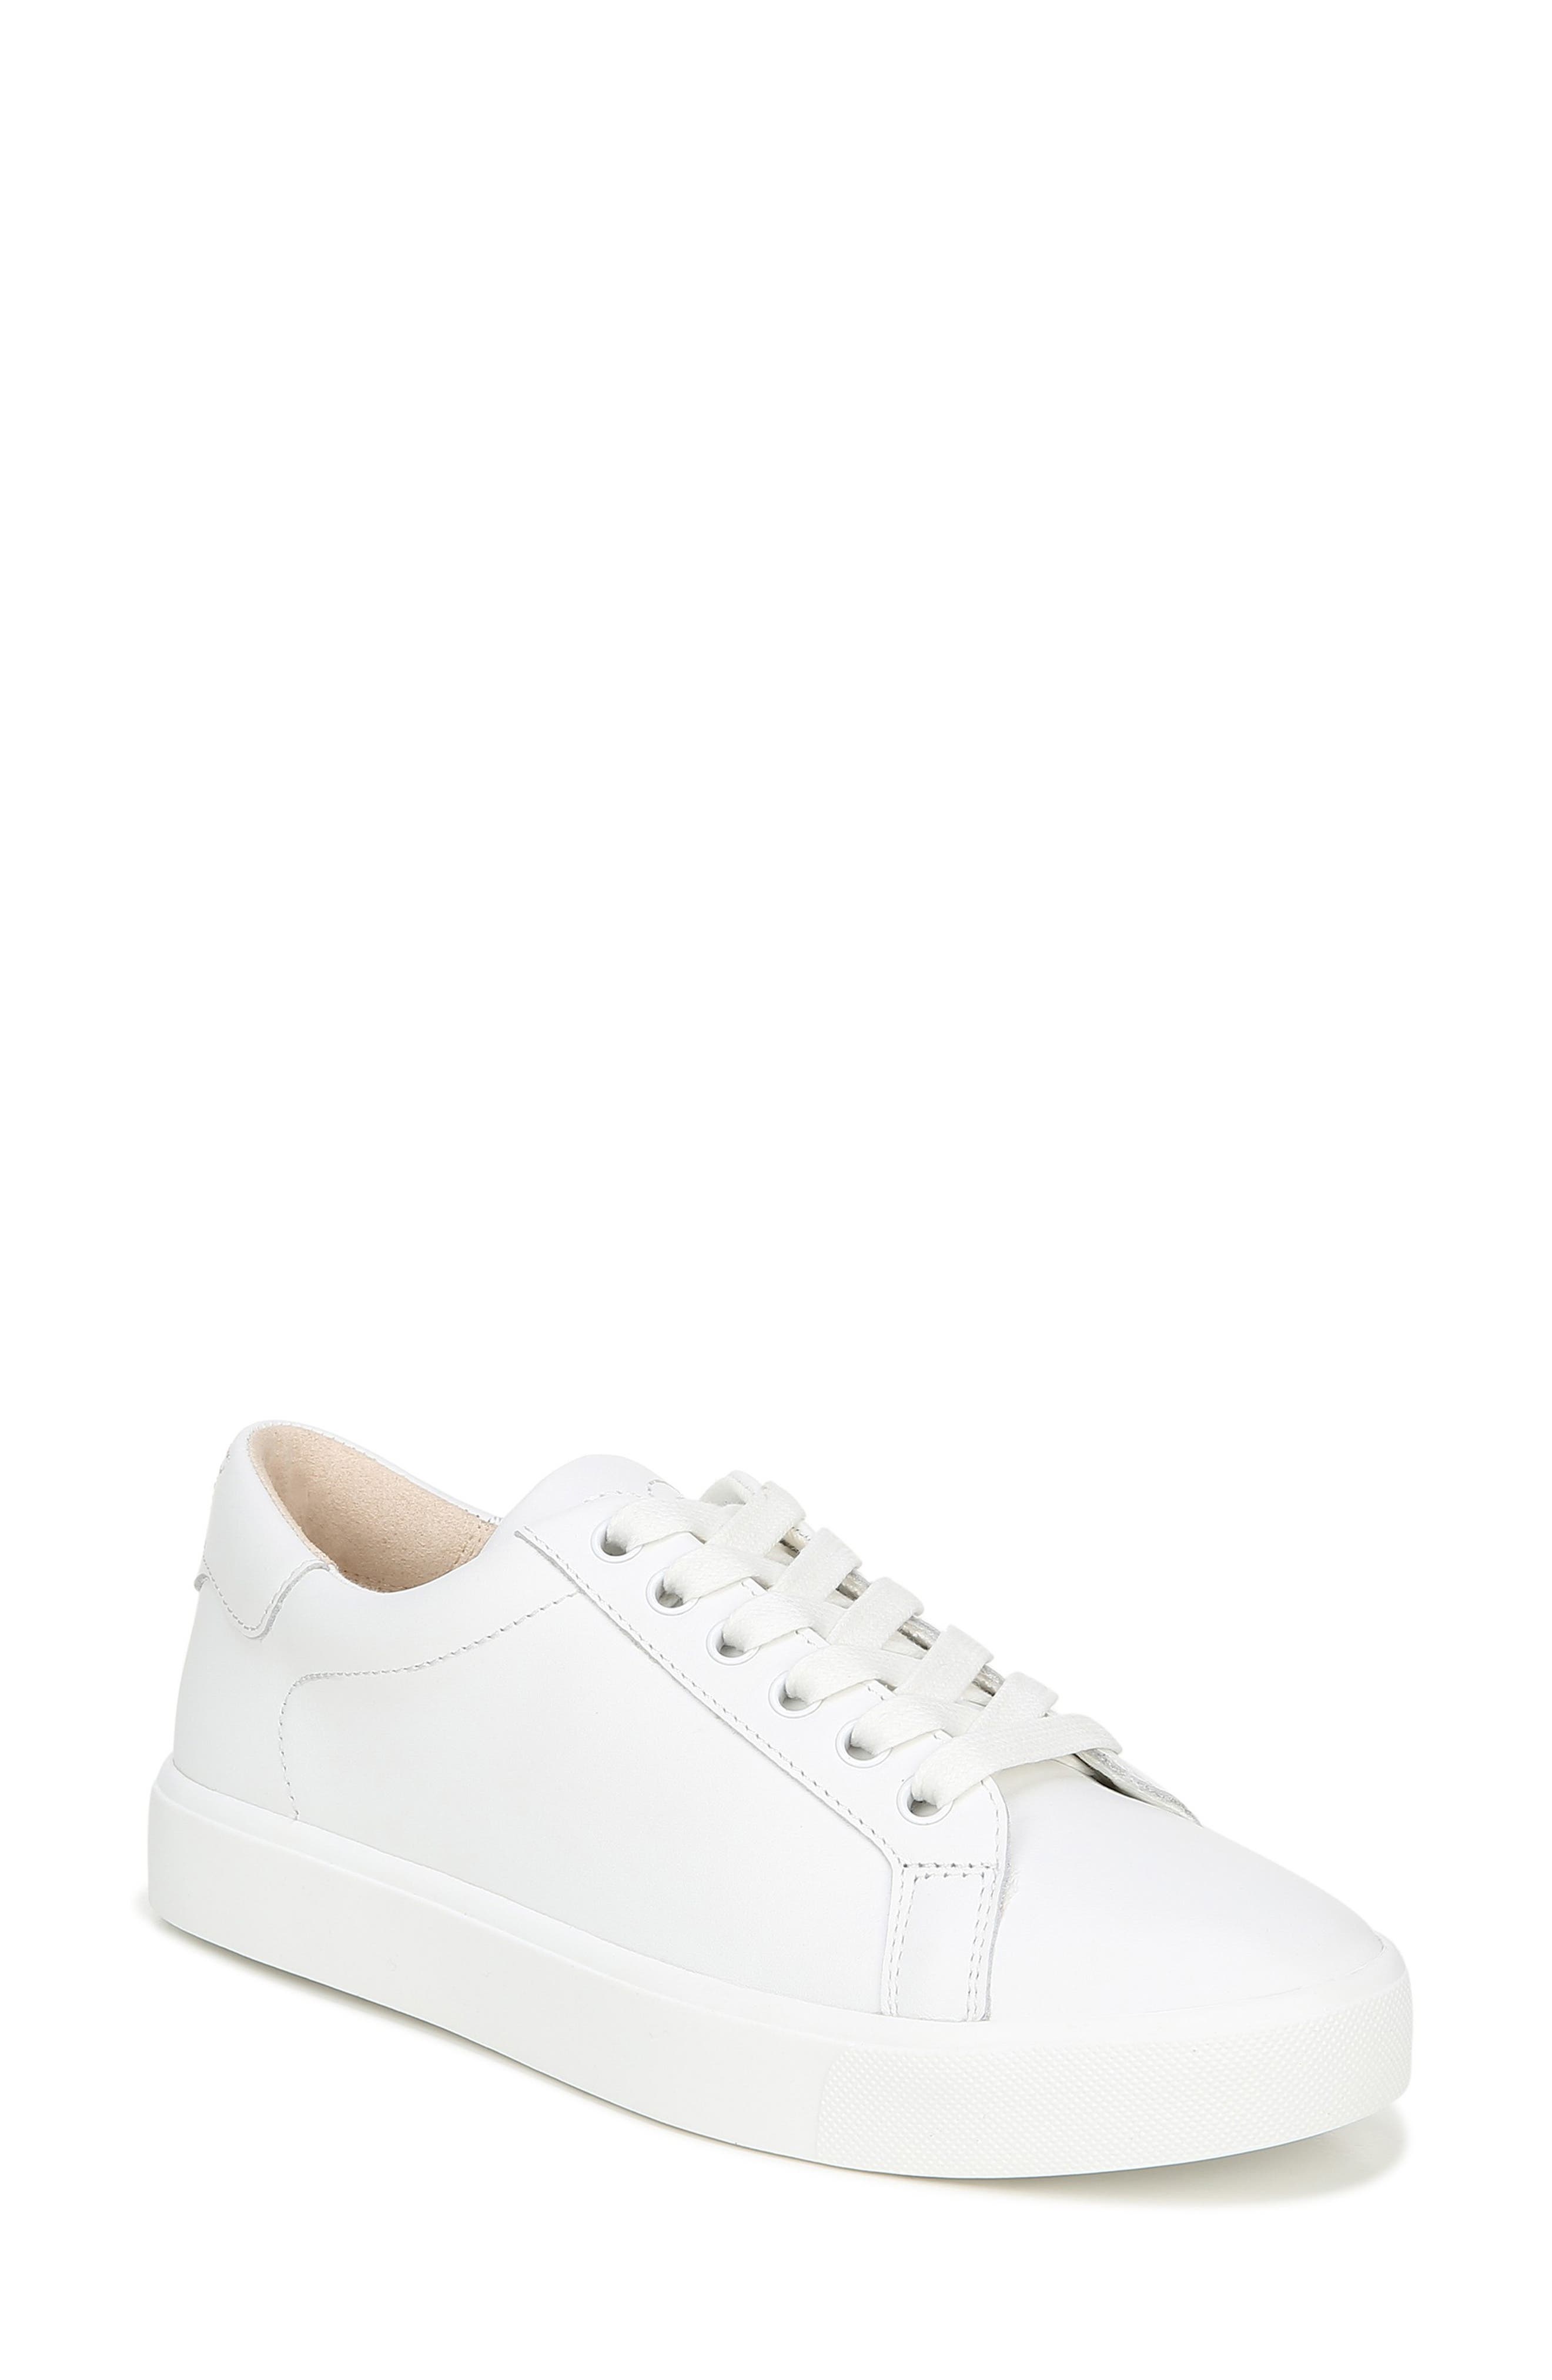 white sneakers women leather